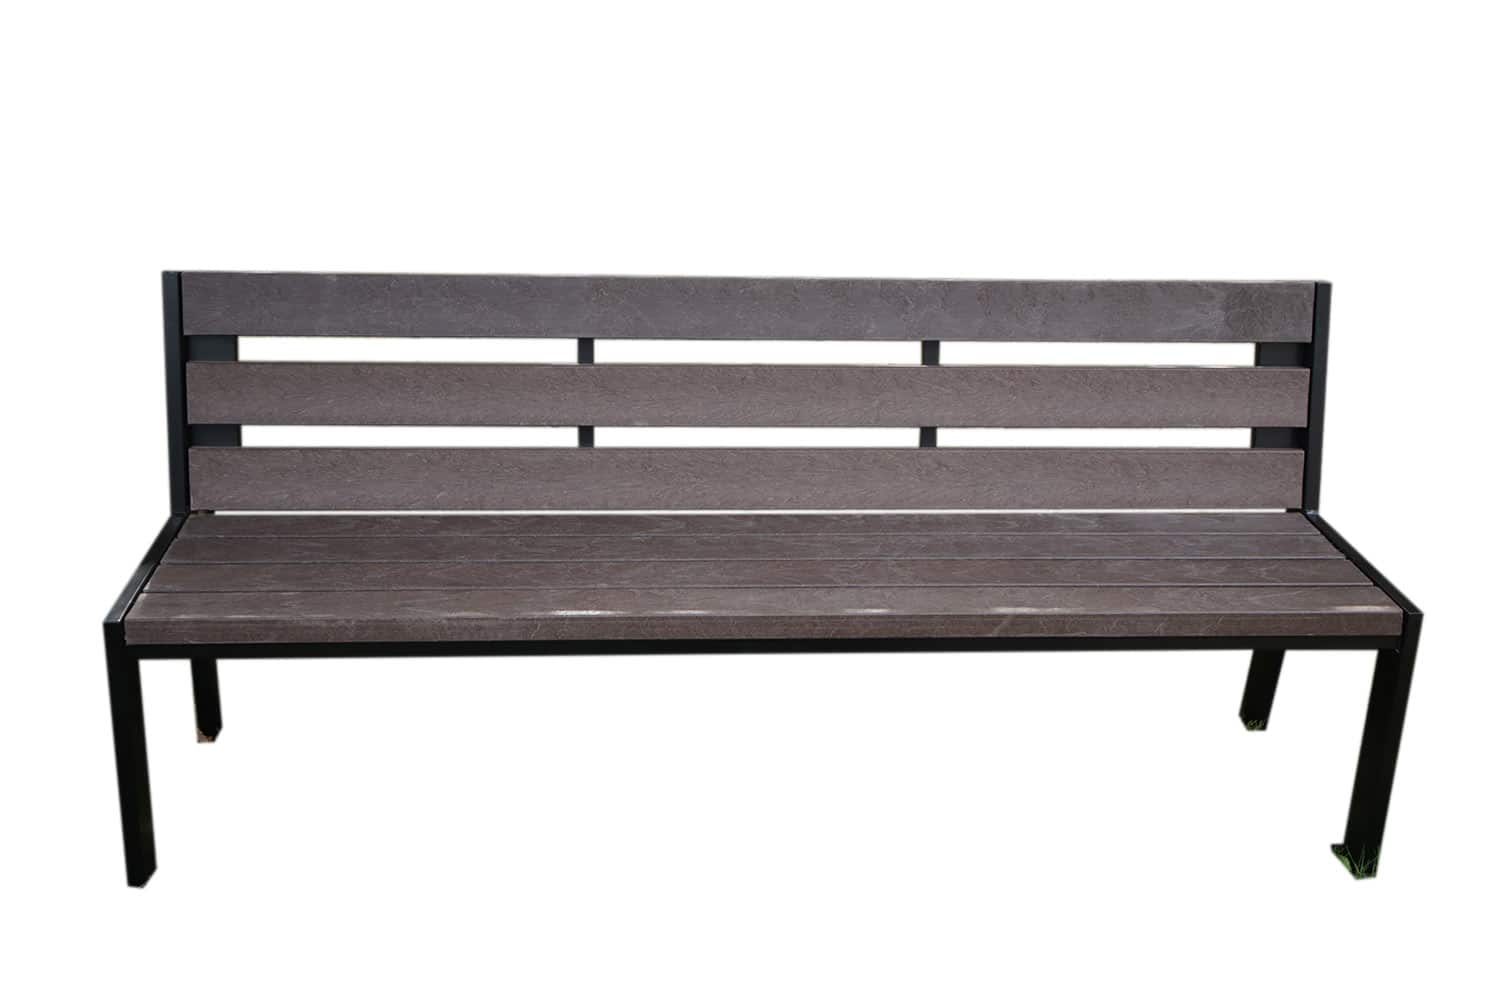 The Selby steel and recycled plastic bench with back.